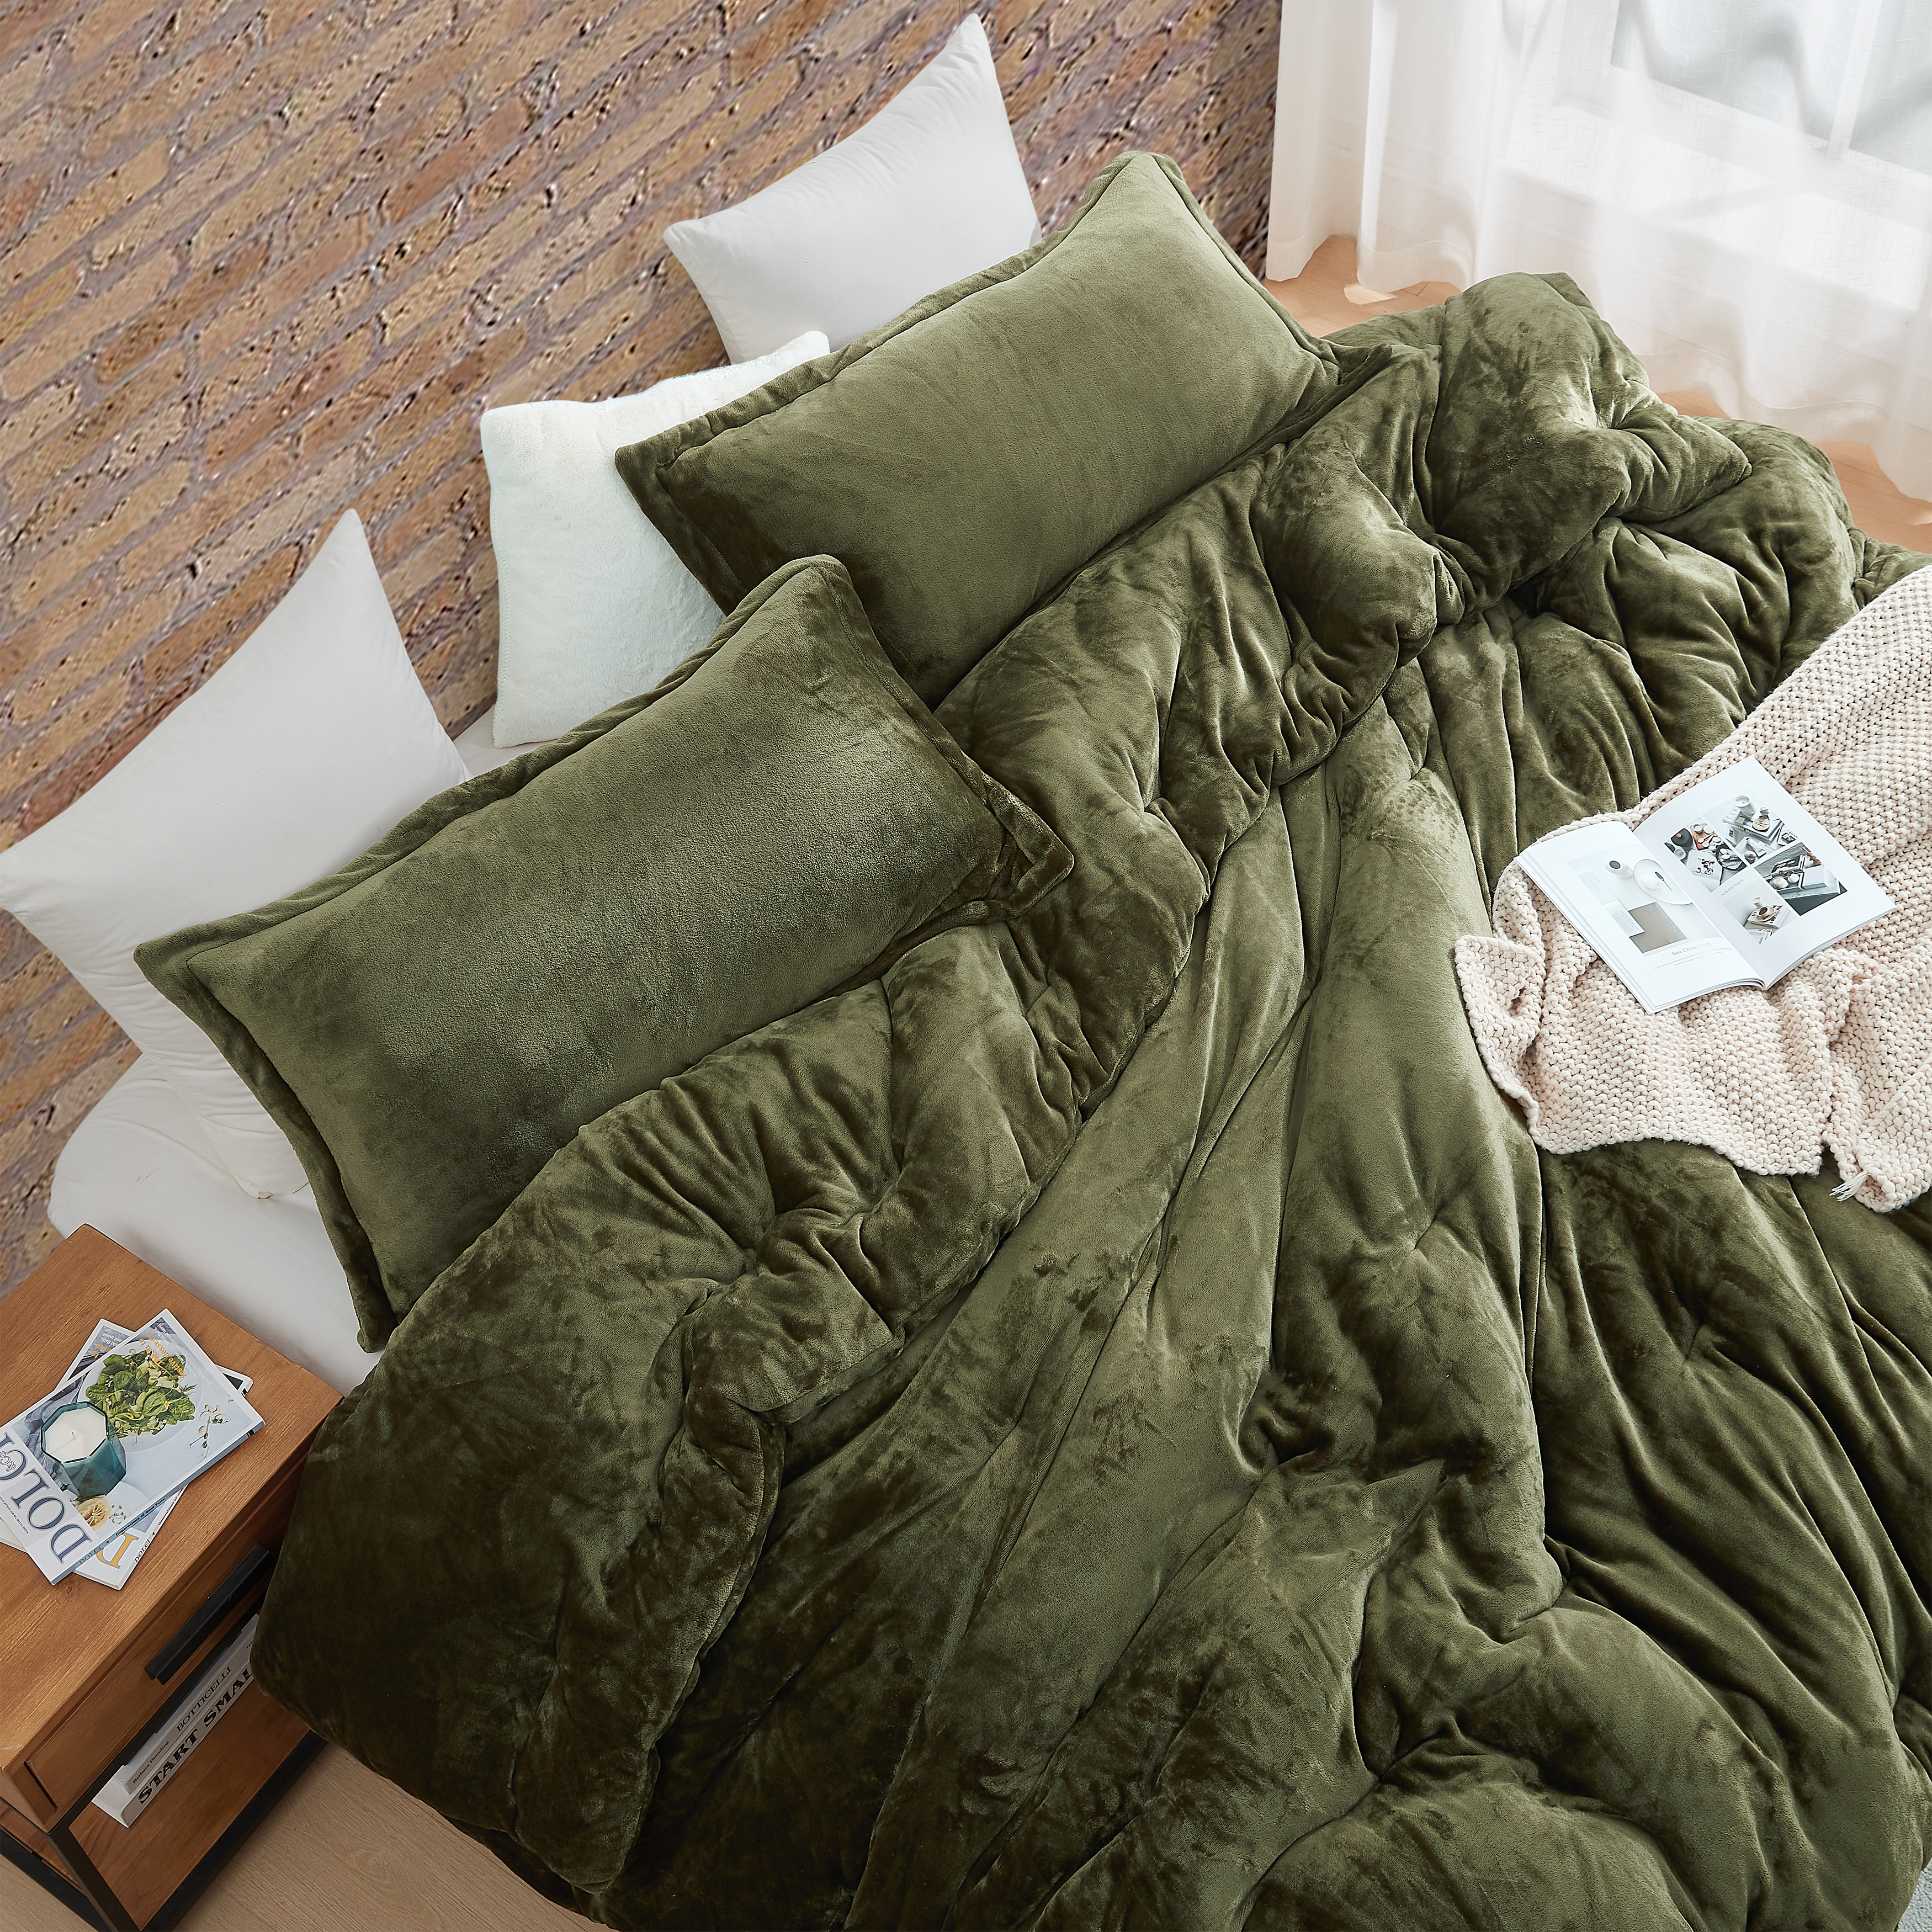 Thicker Than Thick - Coma Inducer Comforter - Standard Plush Filling - Winter Moss